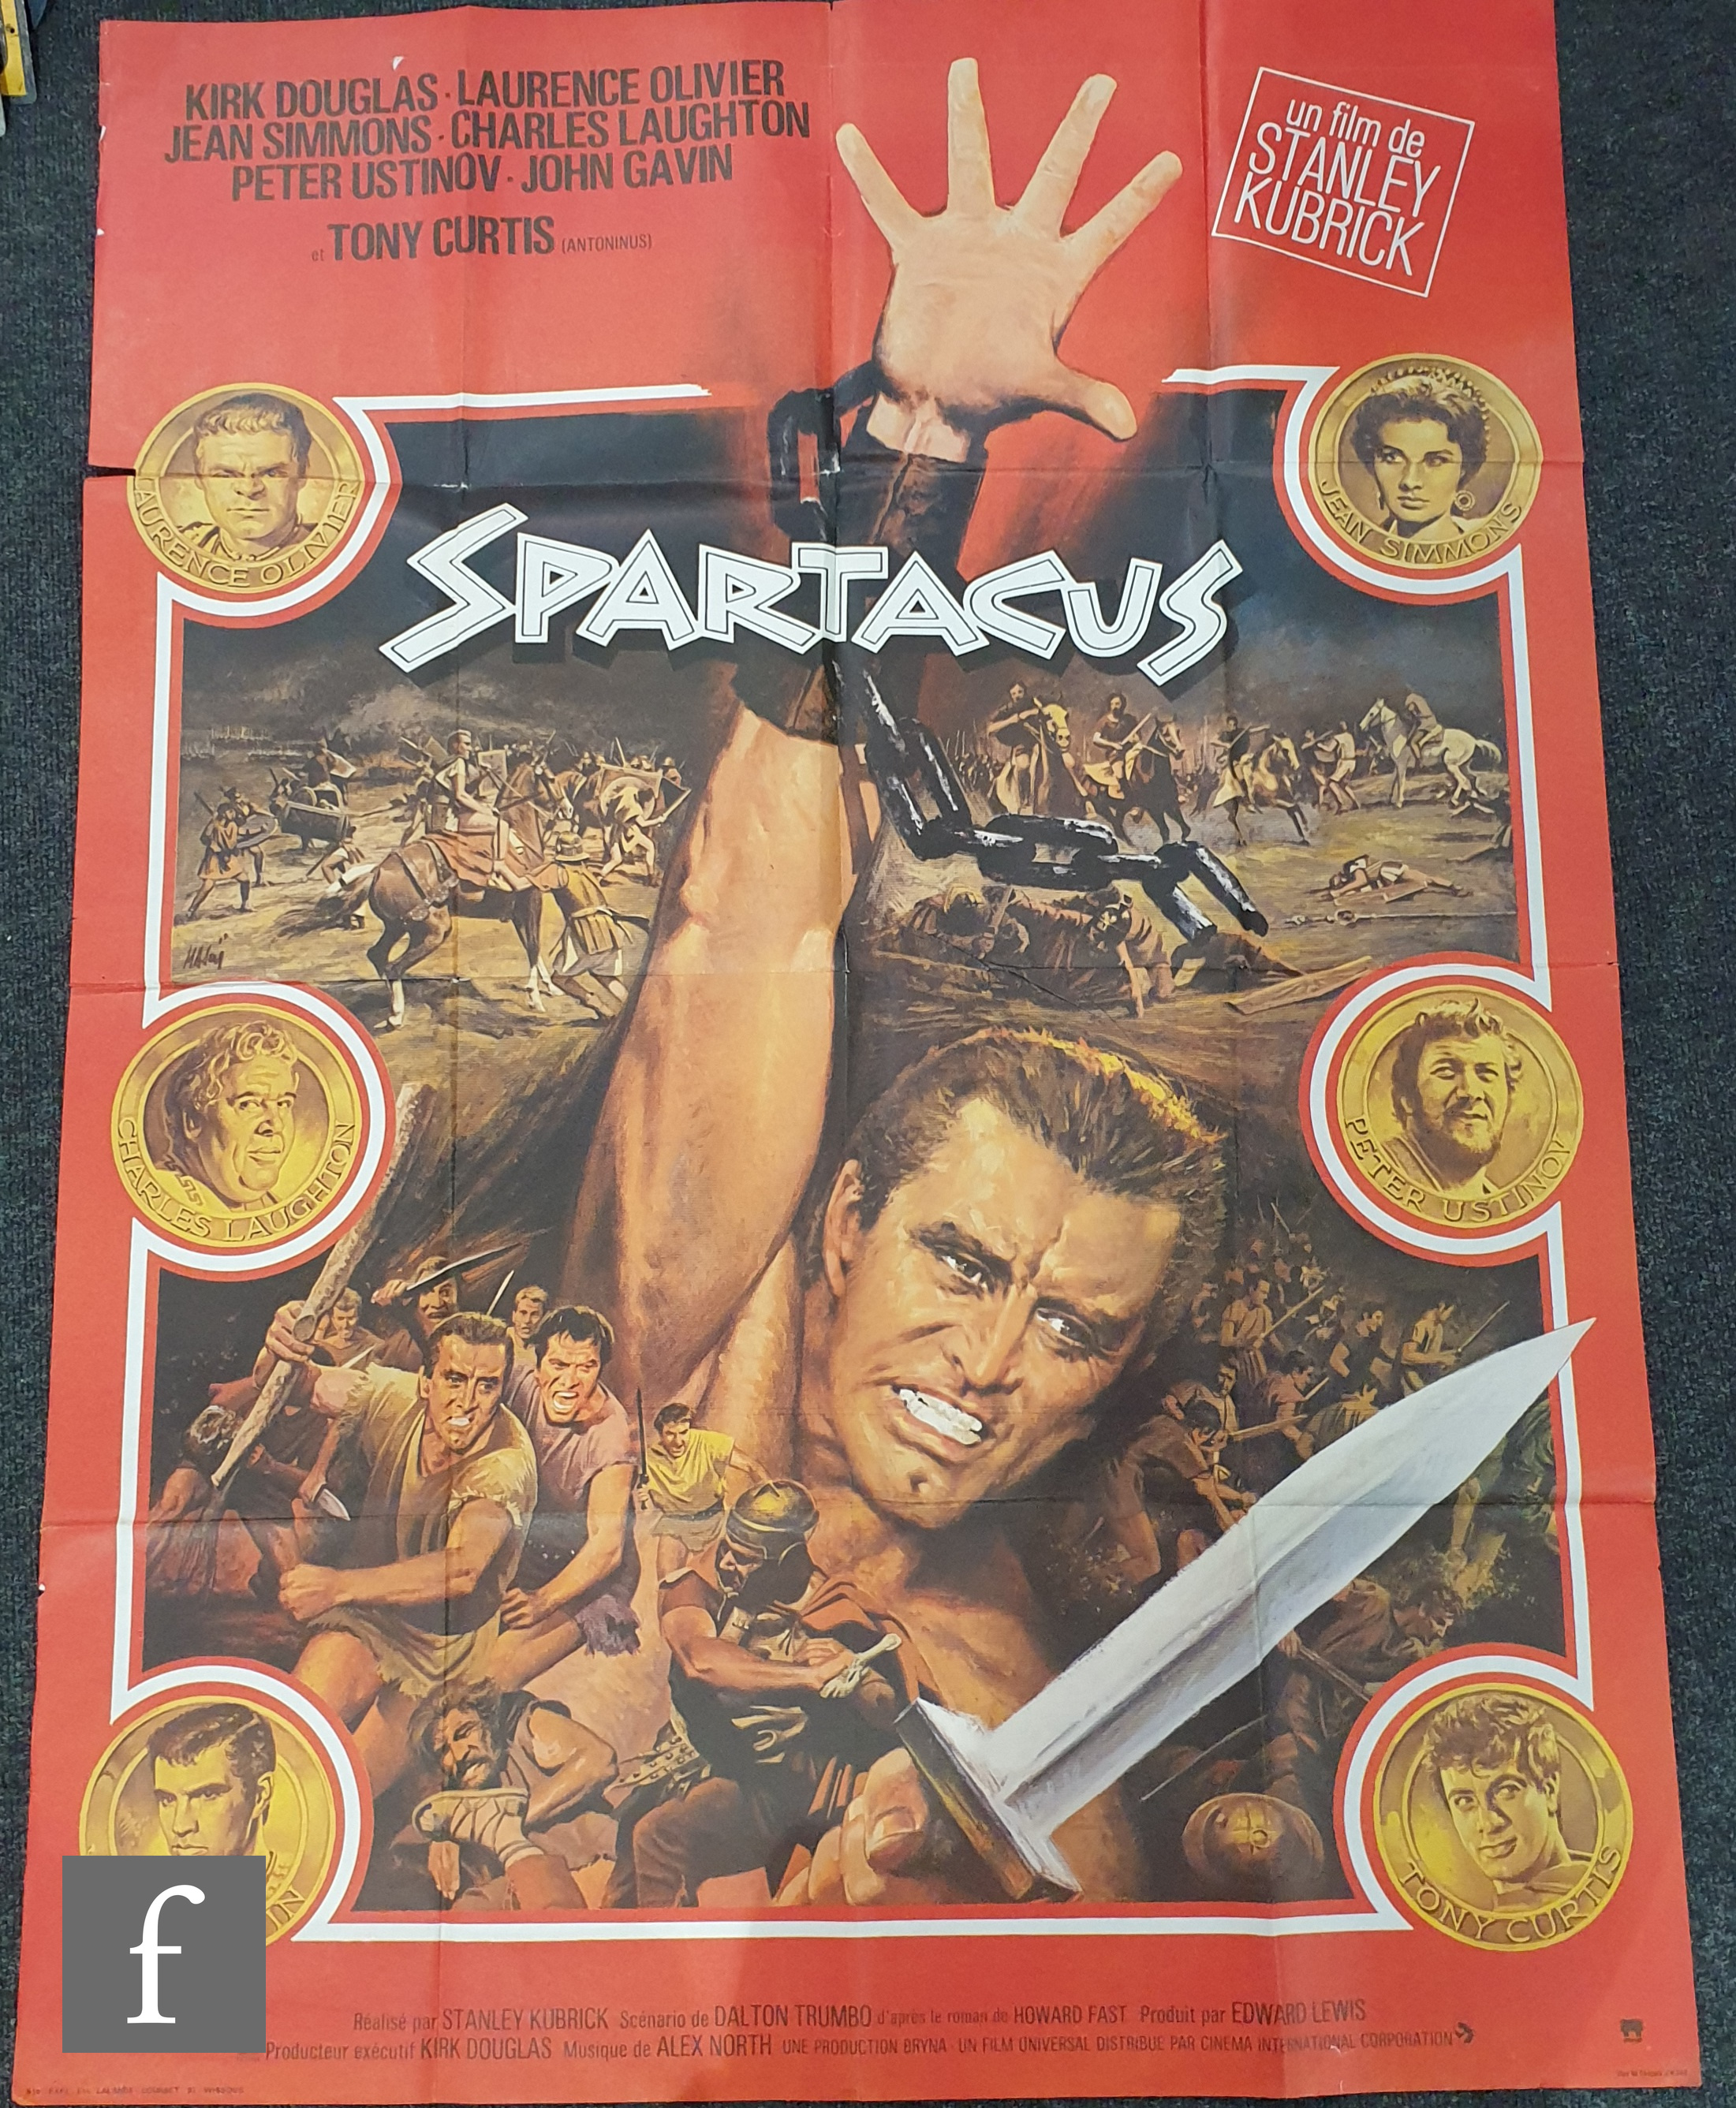 A Spartacus (1967 Re-release) French Grande film poster, directed by Stanley Kubrick, 47 x 63